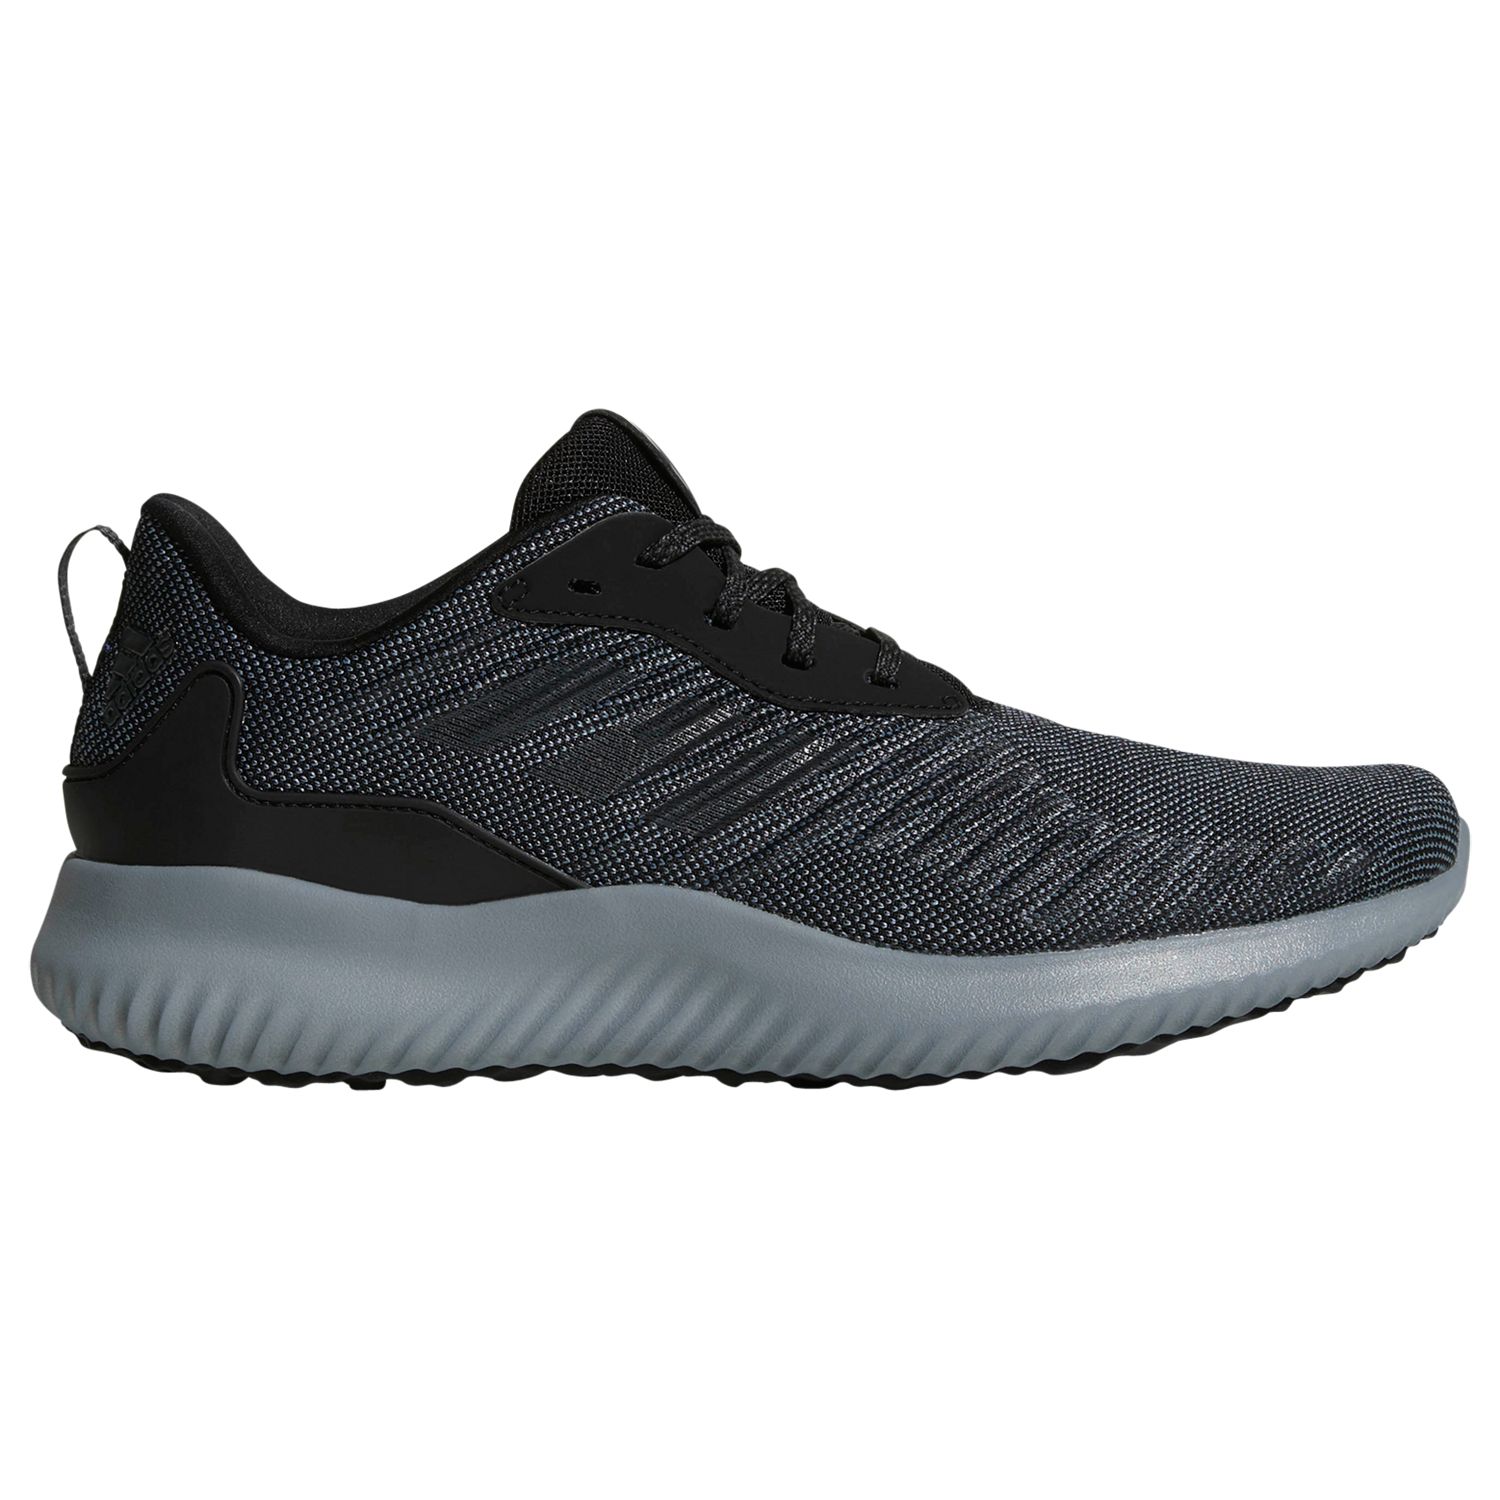 adidas Alphabounce RC Men's Running Shoes, Black, 7.5